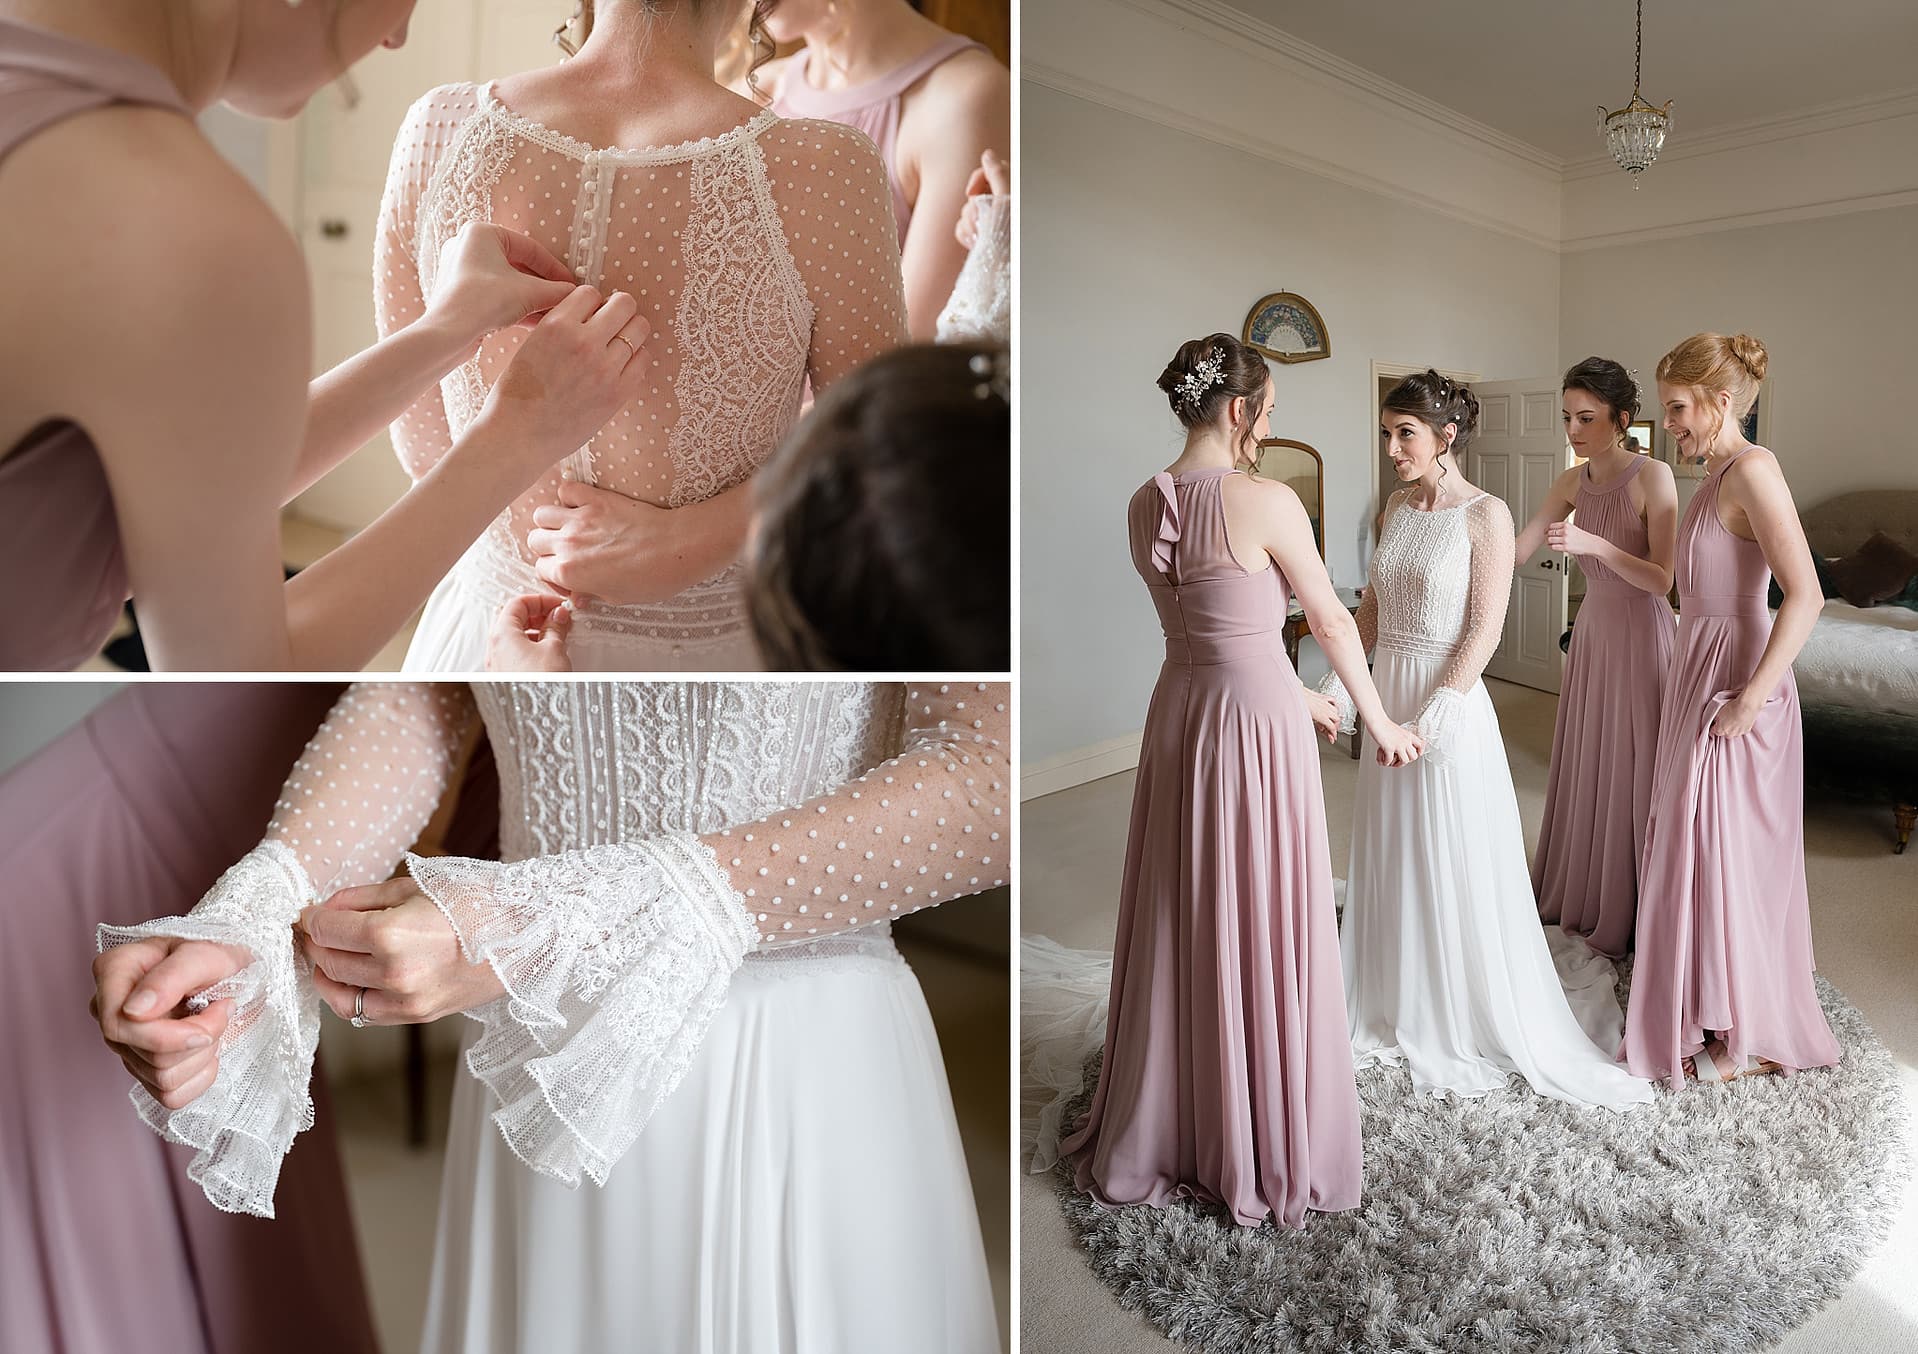 Bridesmaids in dusky pink dresses helping the bride into her dress